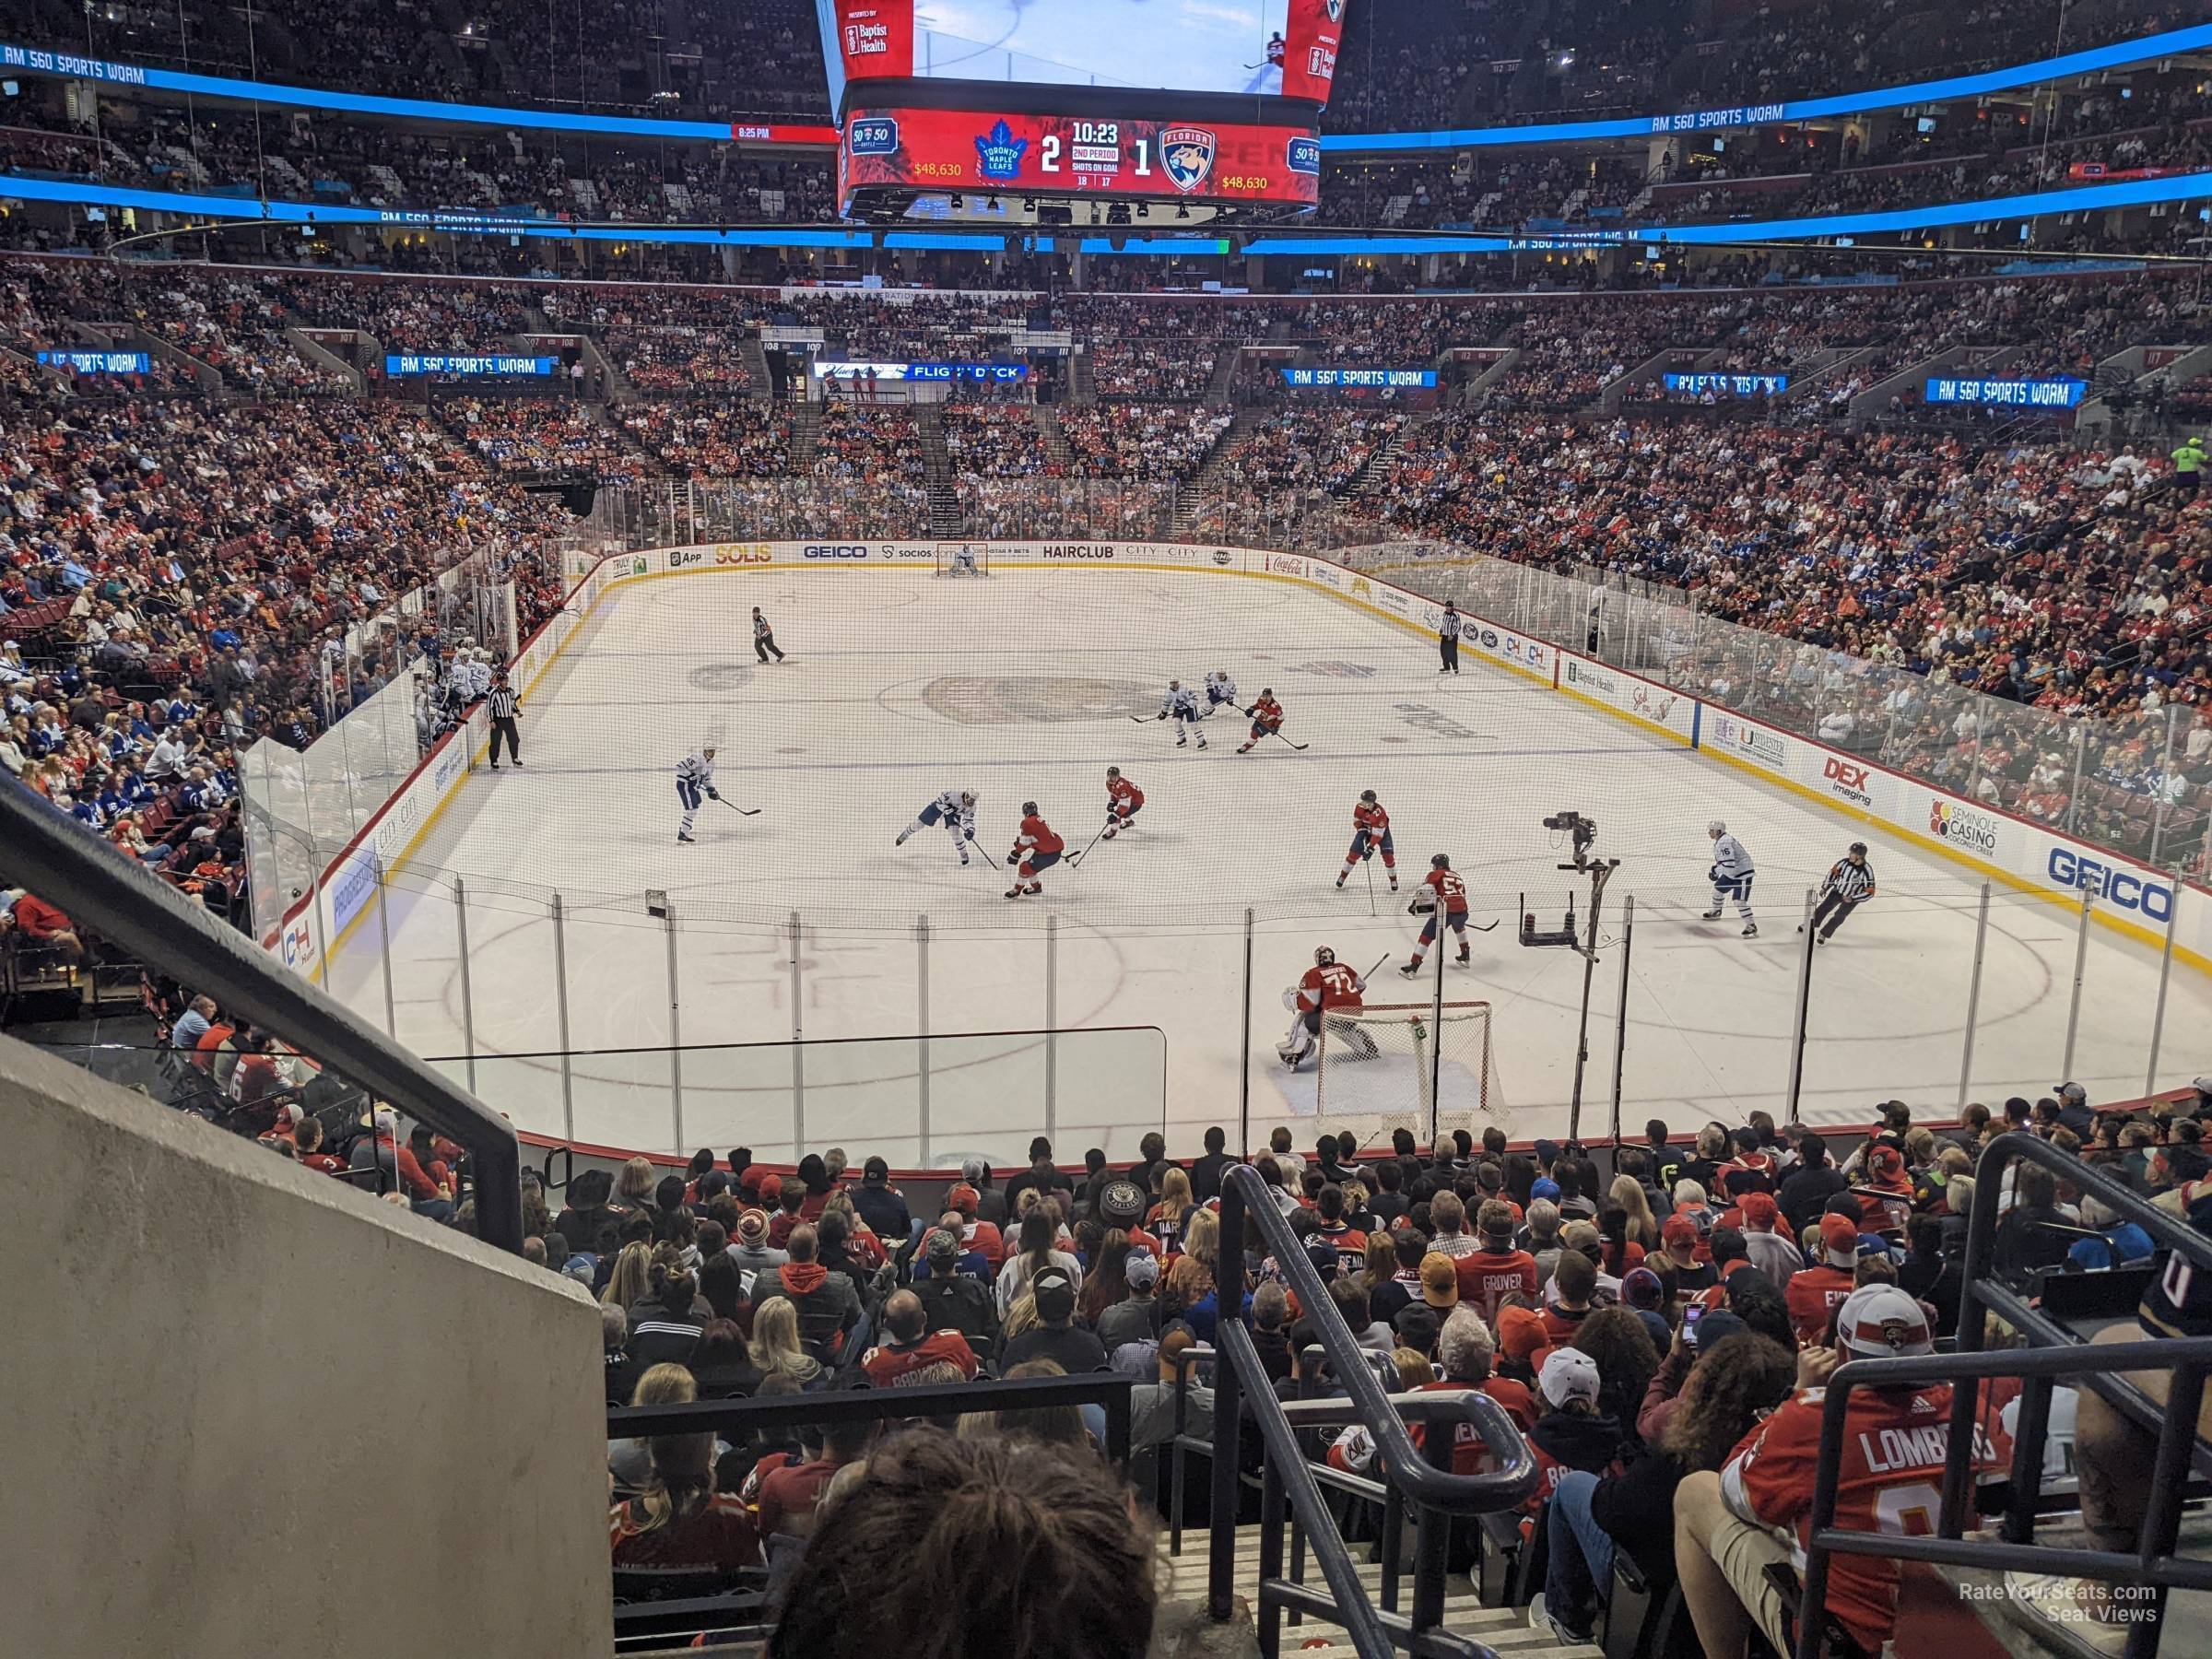 section 128, row 18 seat view  for hockey - fla live arena